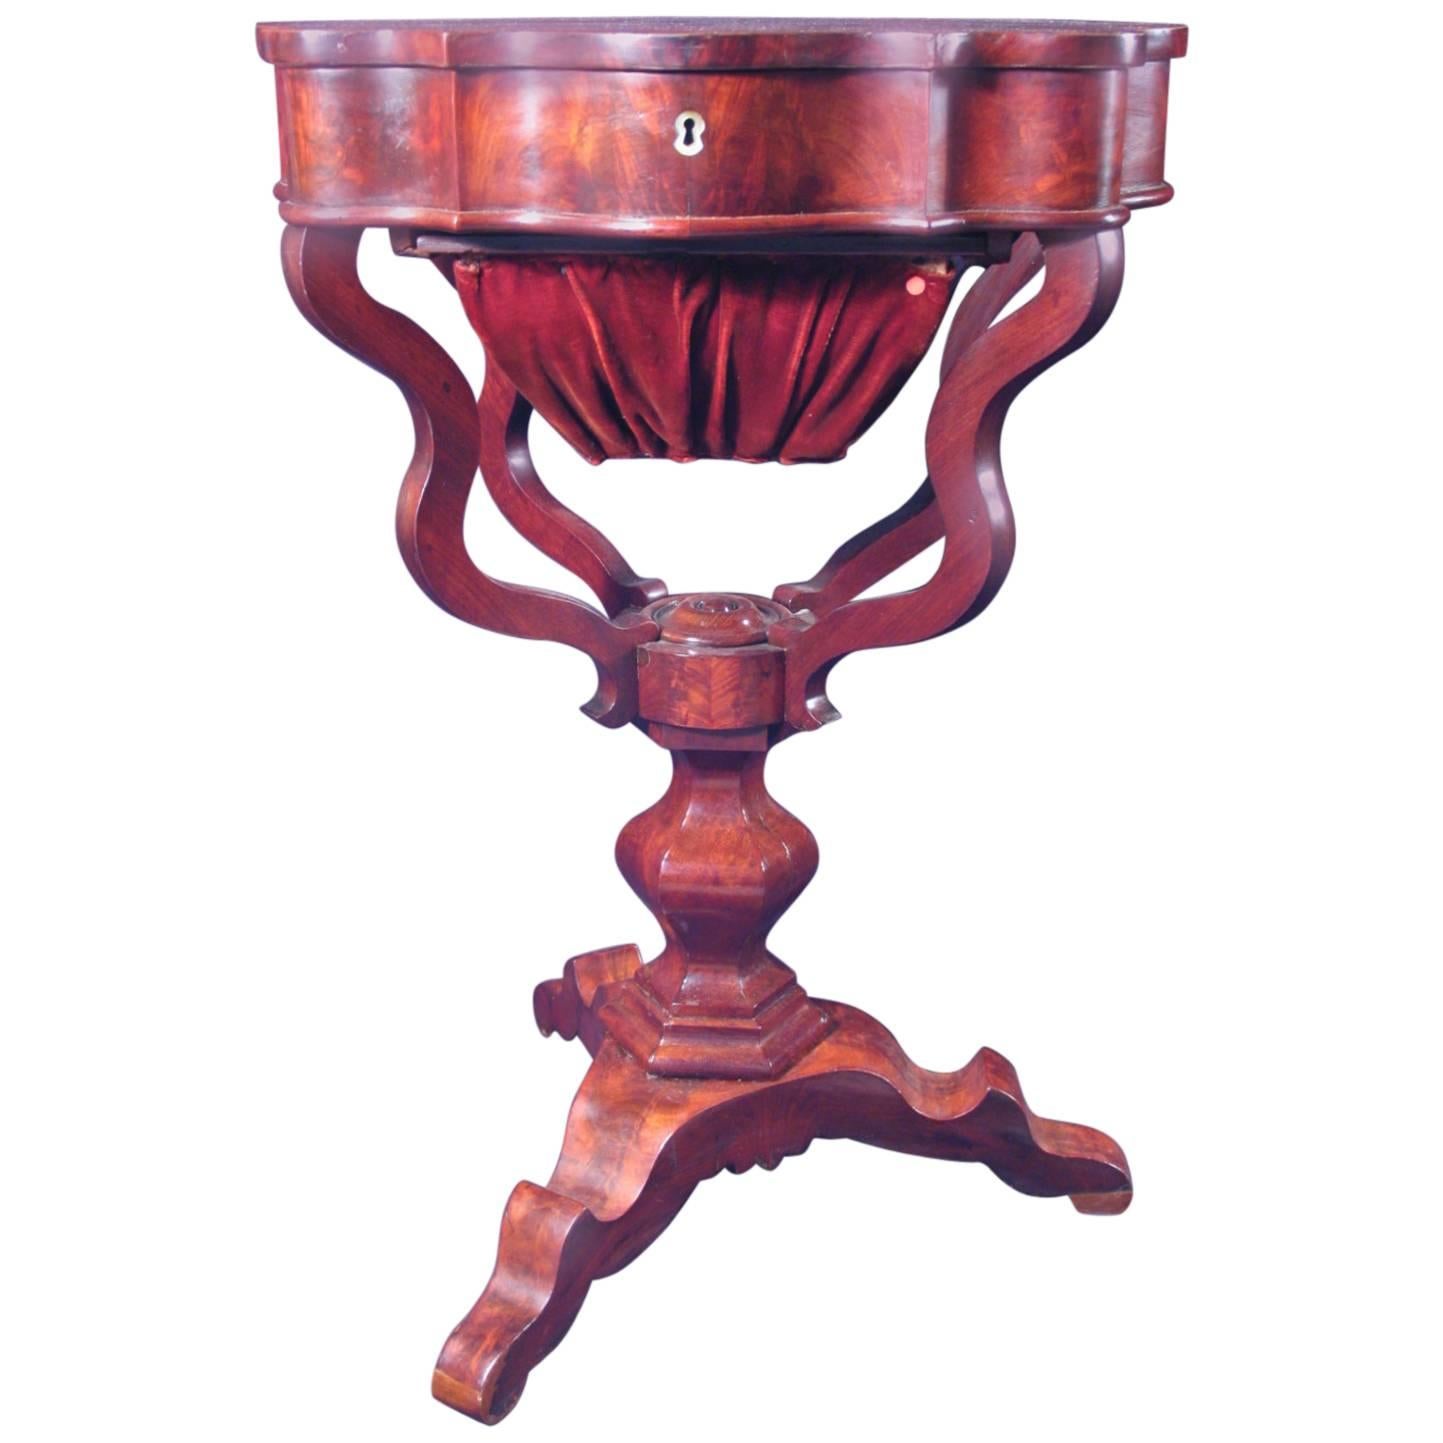 Original 19th century Biedermeier sewing table, mahogany veneer. This unique exquisite table comes from Northern Germany. 
The locking, hinged lid raises to reveal nine compartments, the lid of the central compartment is beautifully decorated with